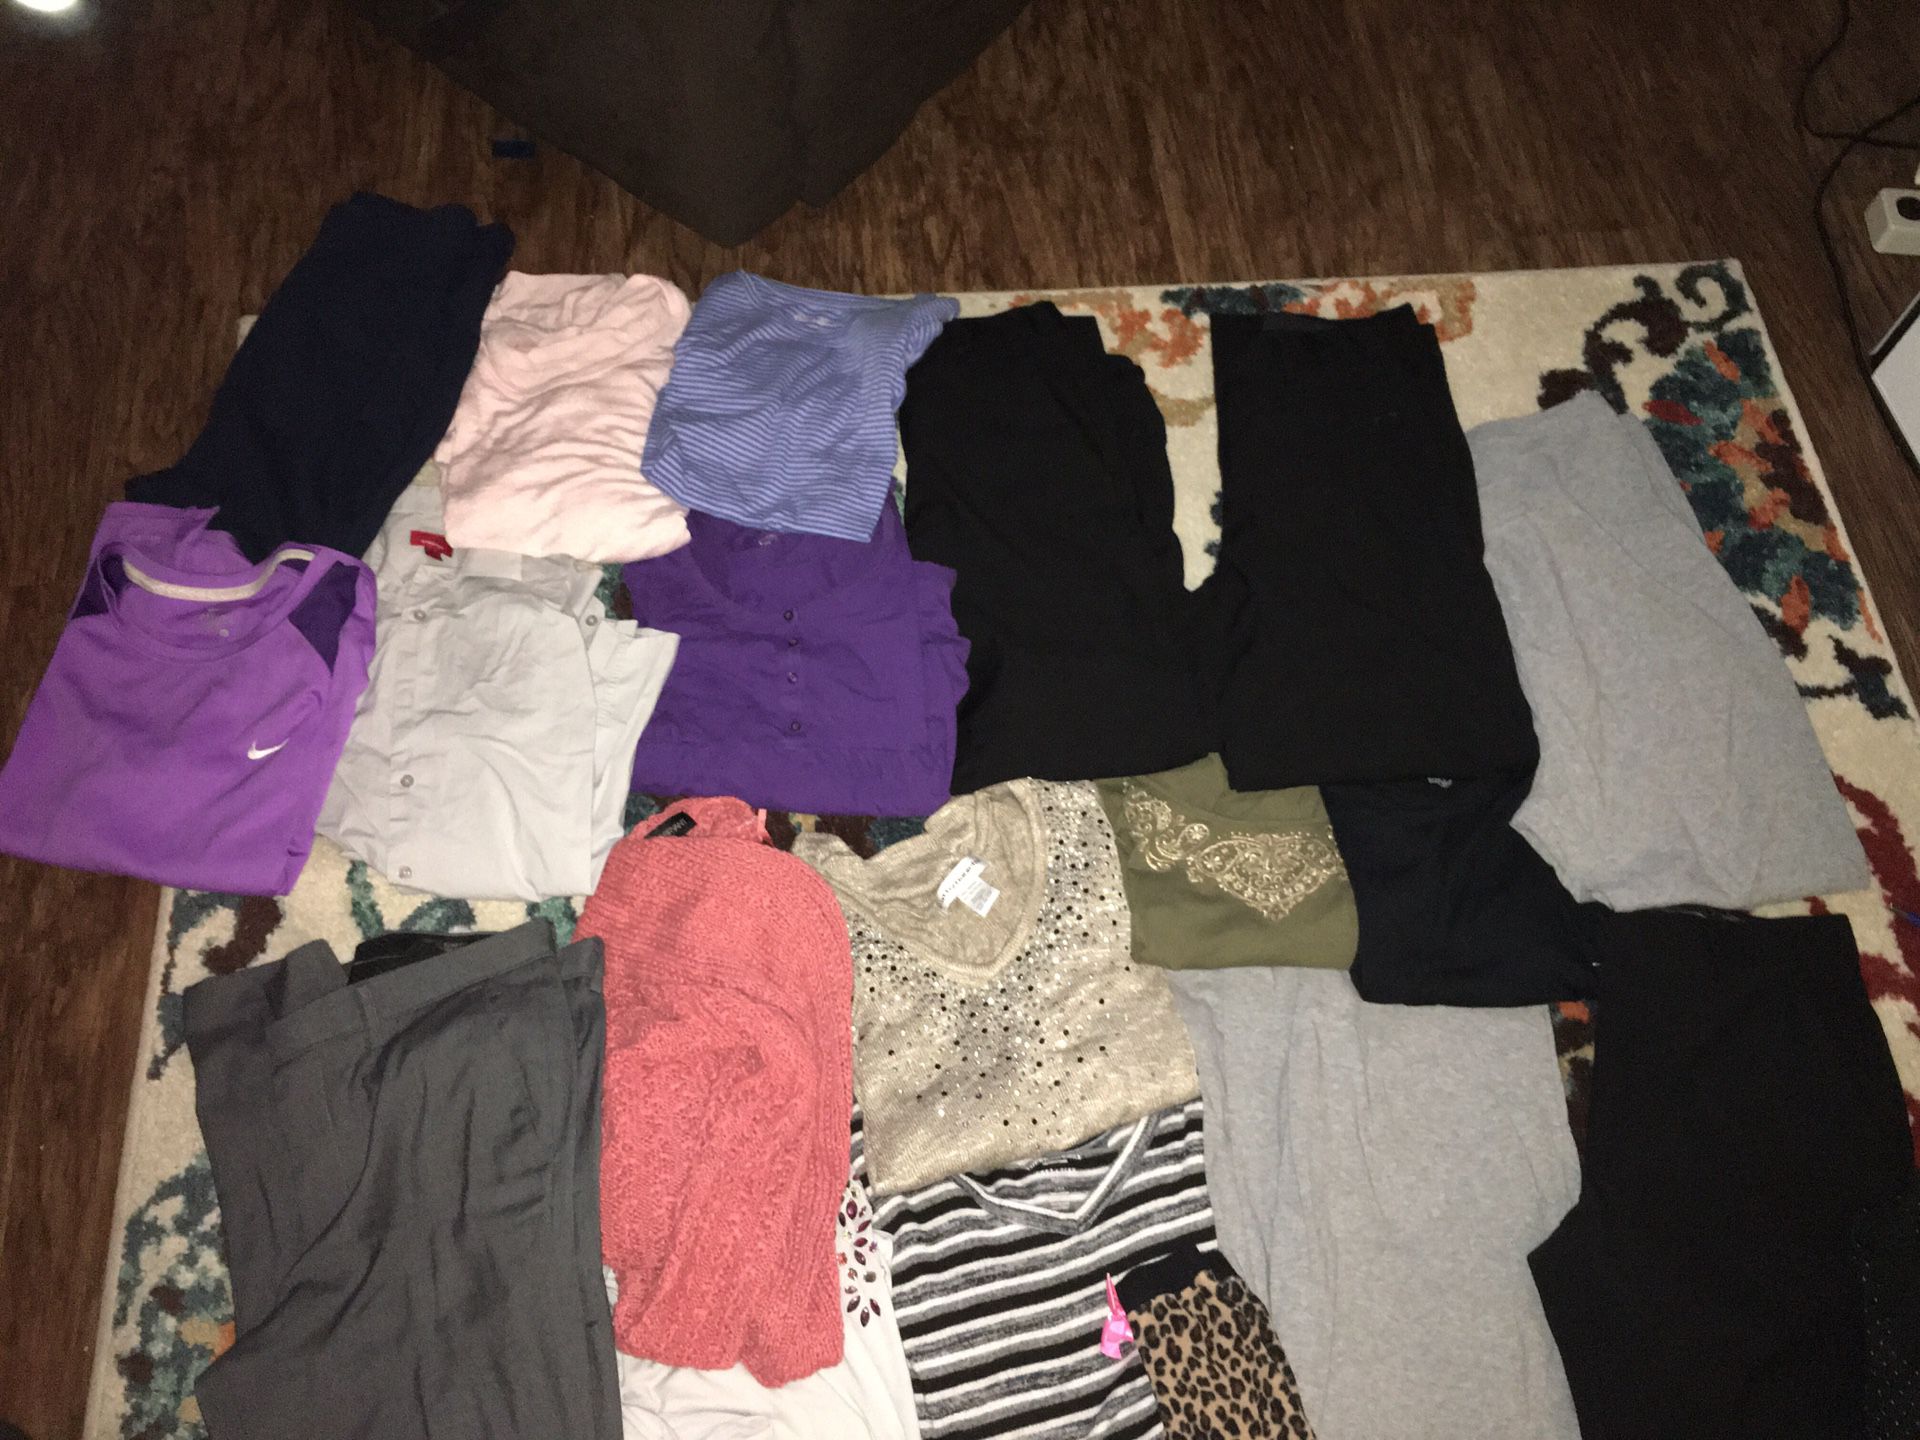 Mixture of maternity, men’s and women’s clothing will take 5$ for all of it. Mixture of sizes